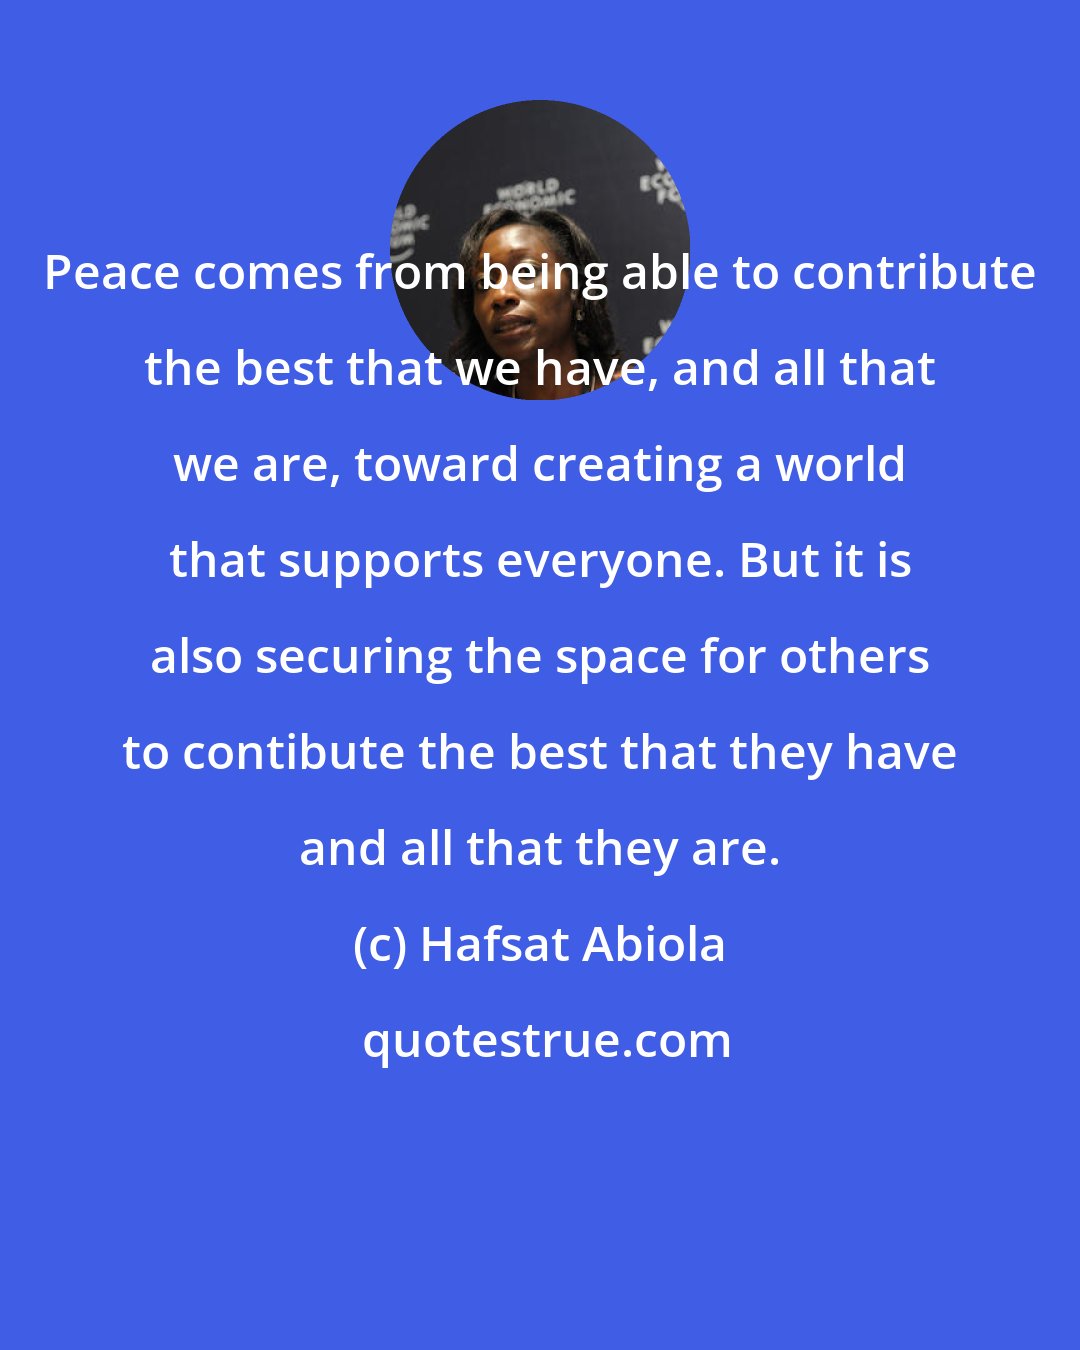 Hafsat Abiola: Peace comes from being able to contribute the best that we have, and all that we are, toward creating a world that supports everyone. But it is also securing the space for others to contibute the best that they have and all that they are.